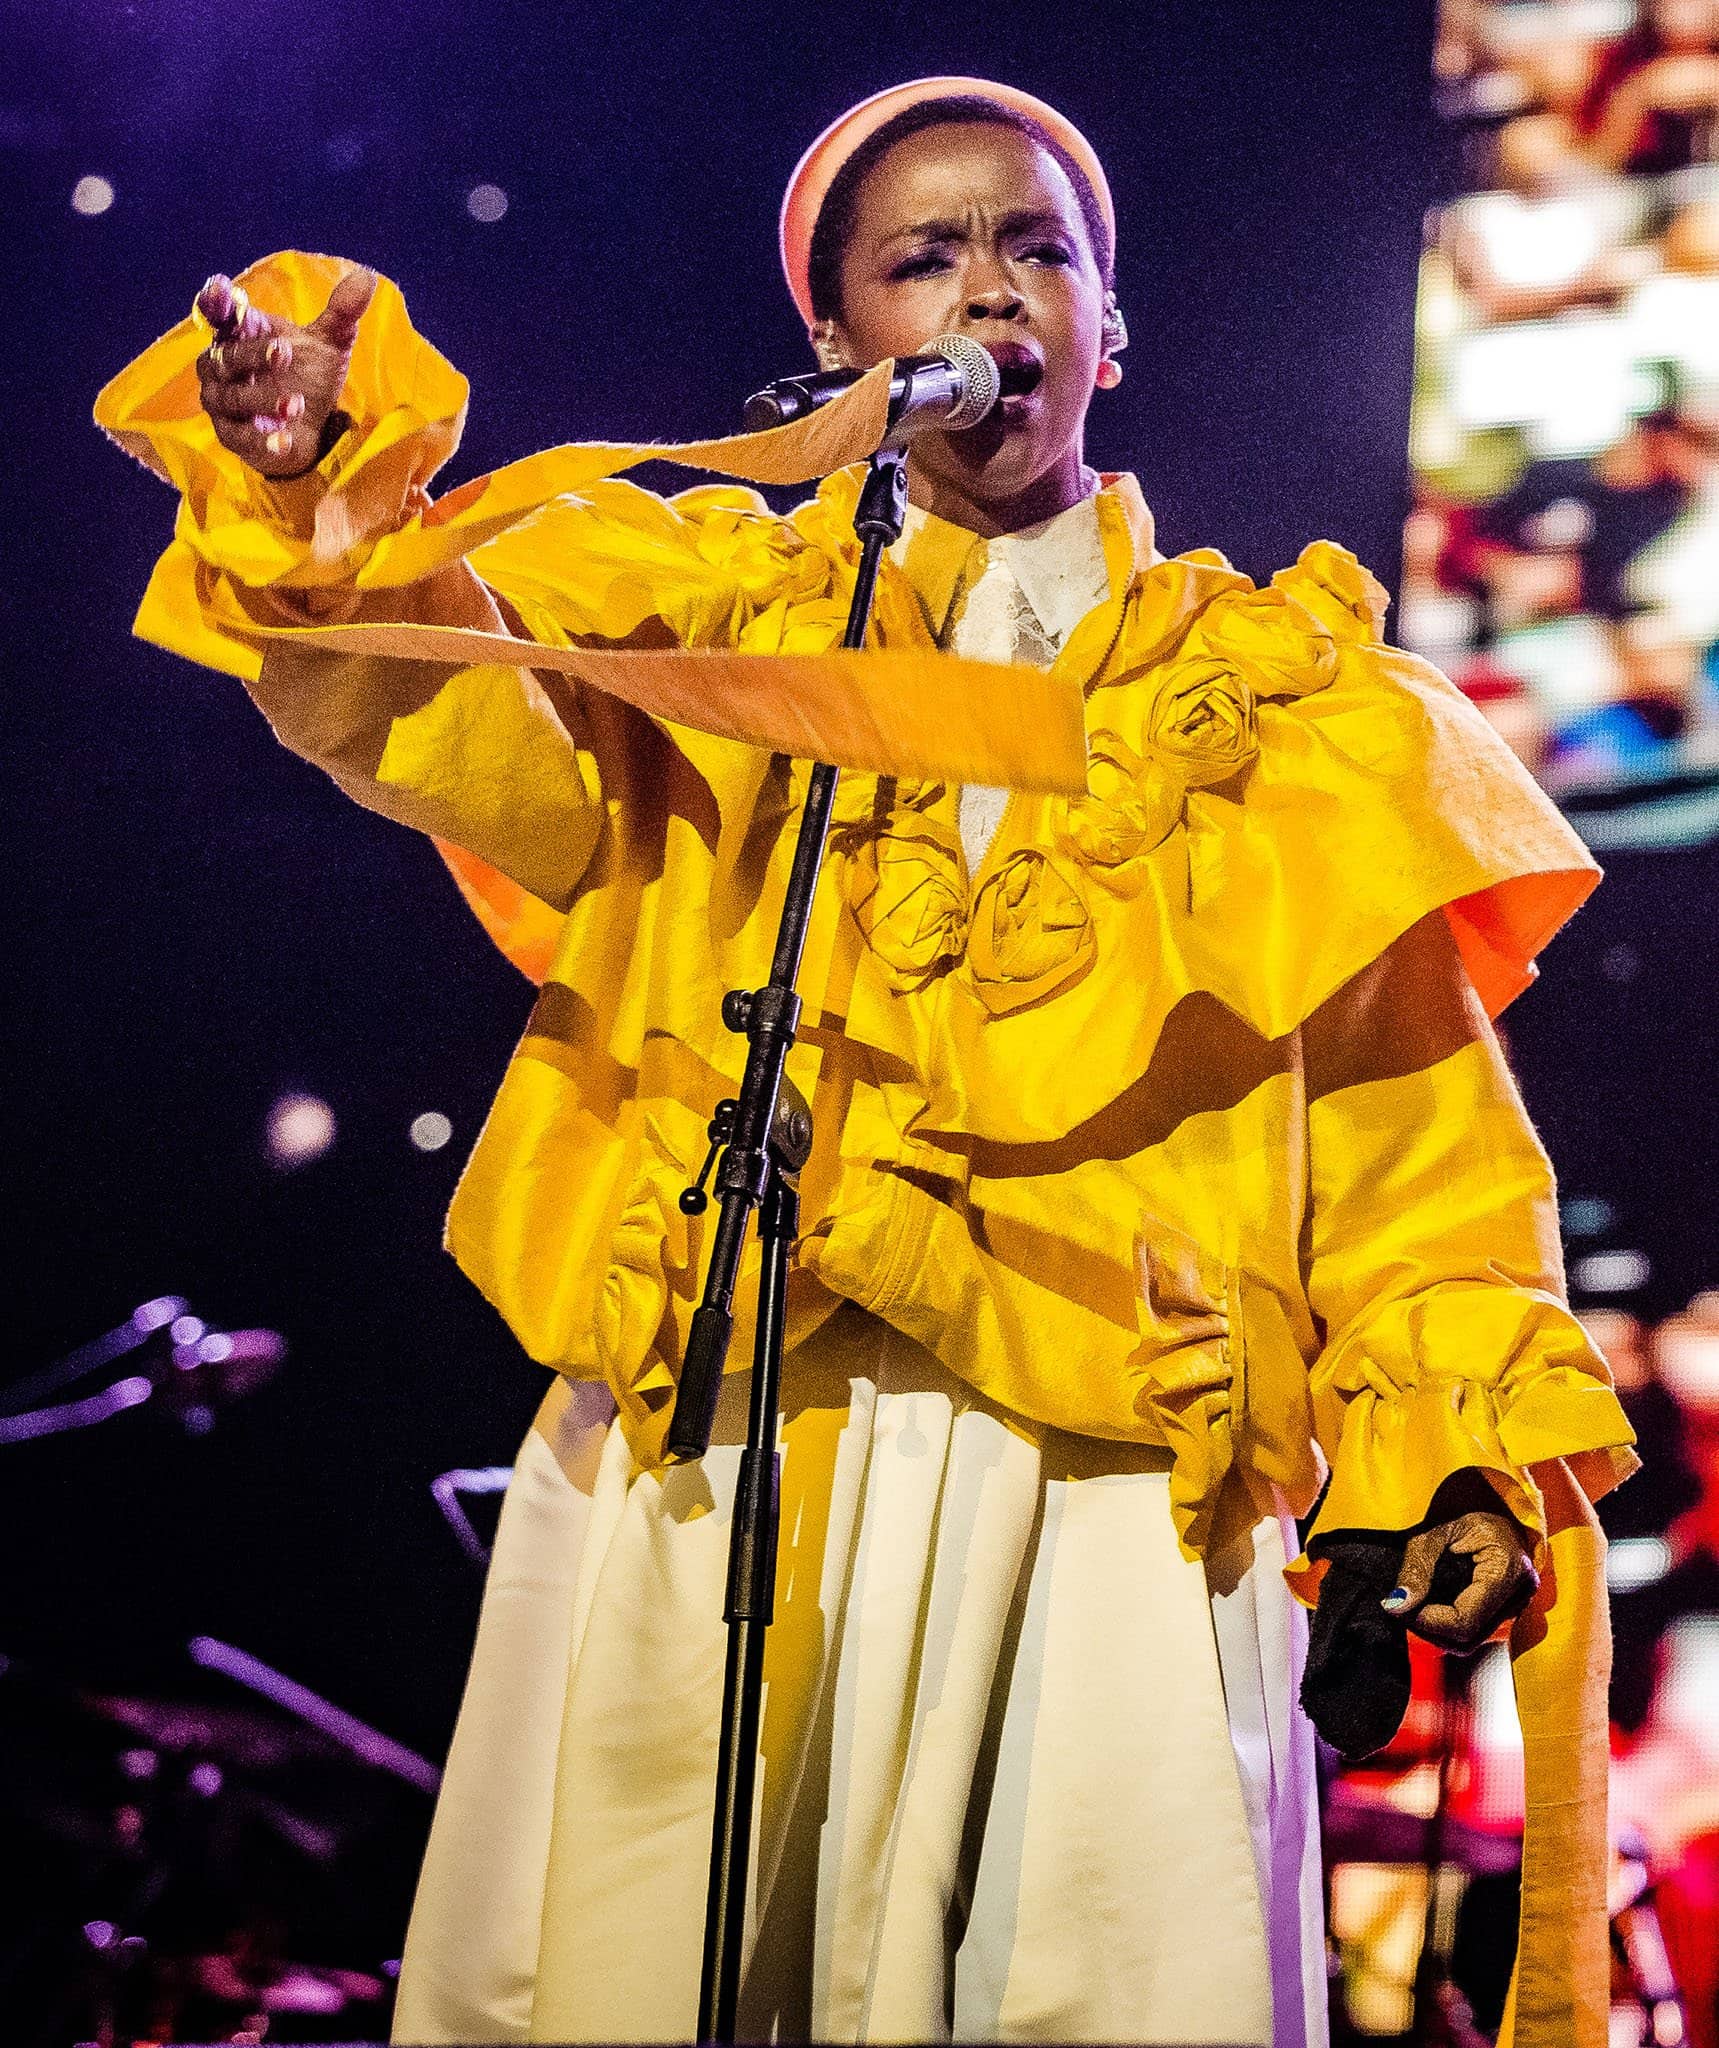 Growing up in a musically oriented family, Lauryn Hill started her career as a member of the Fugees, which won several Grammy awards